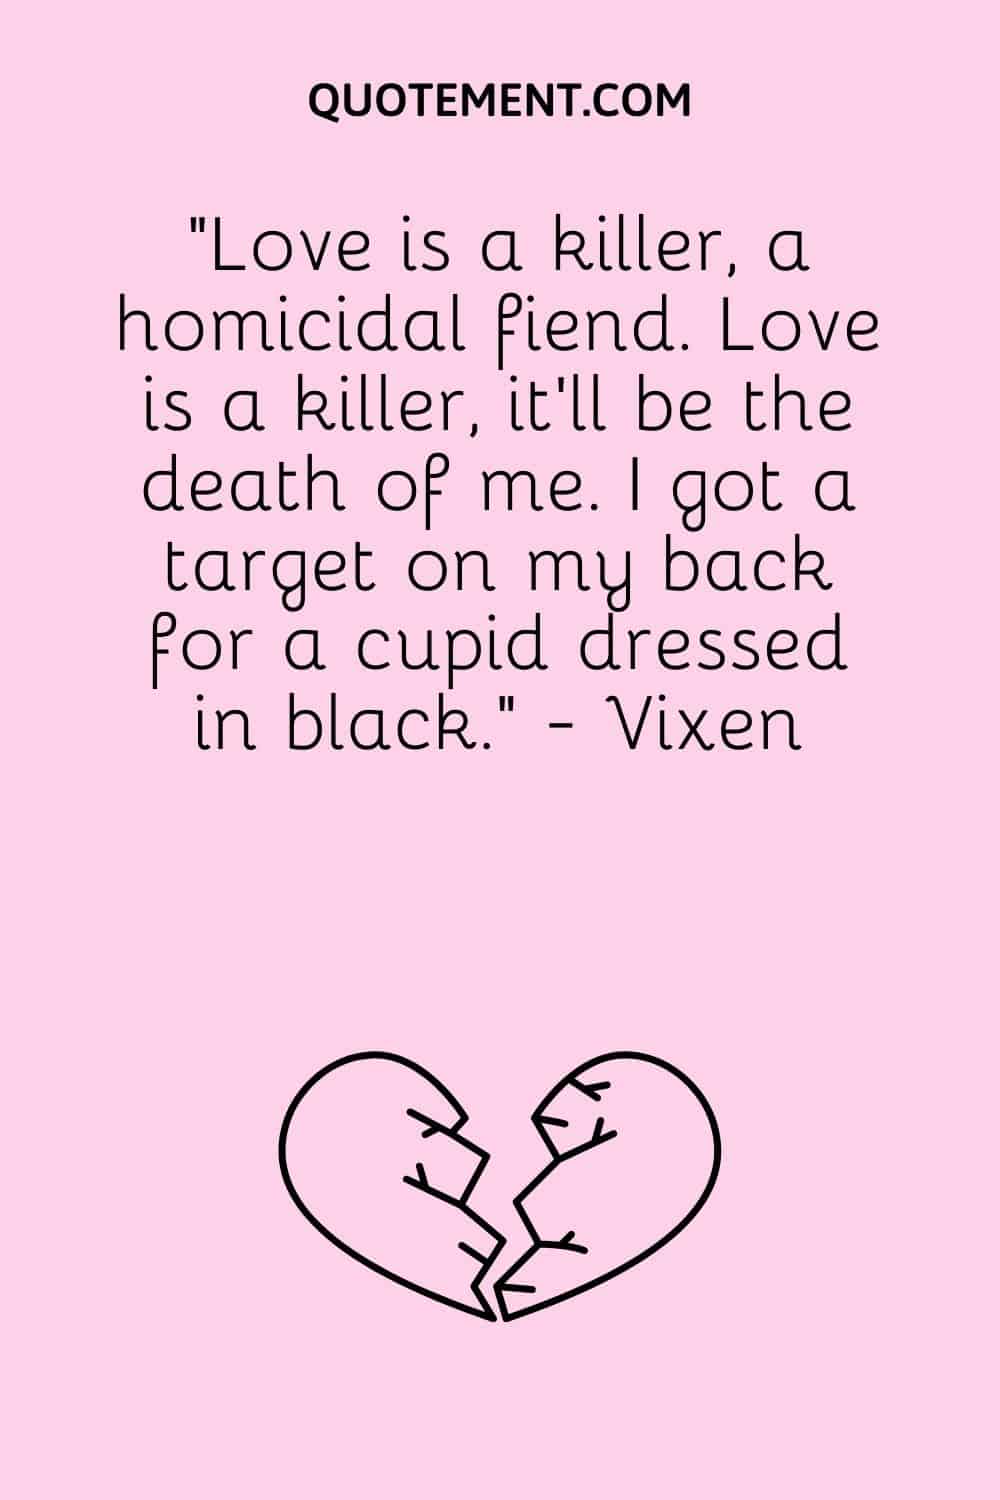 “Love is a killer, a homicidal fiend. Love is a killer, it'll be the death of me. I got a target on my back for a cupid dressed in black.” - Vixen